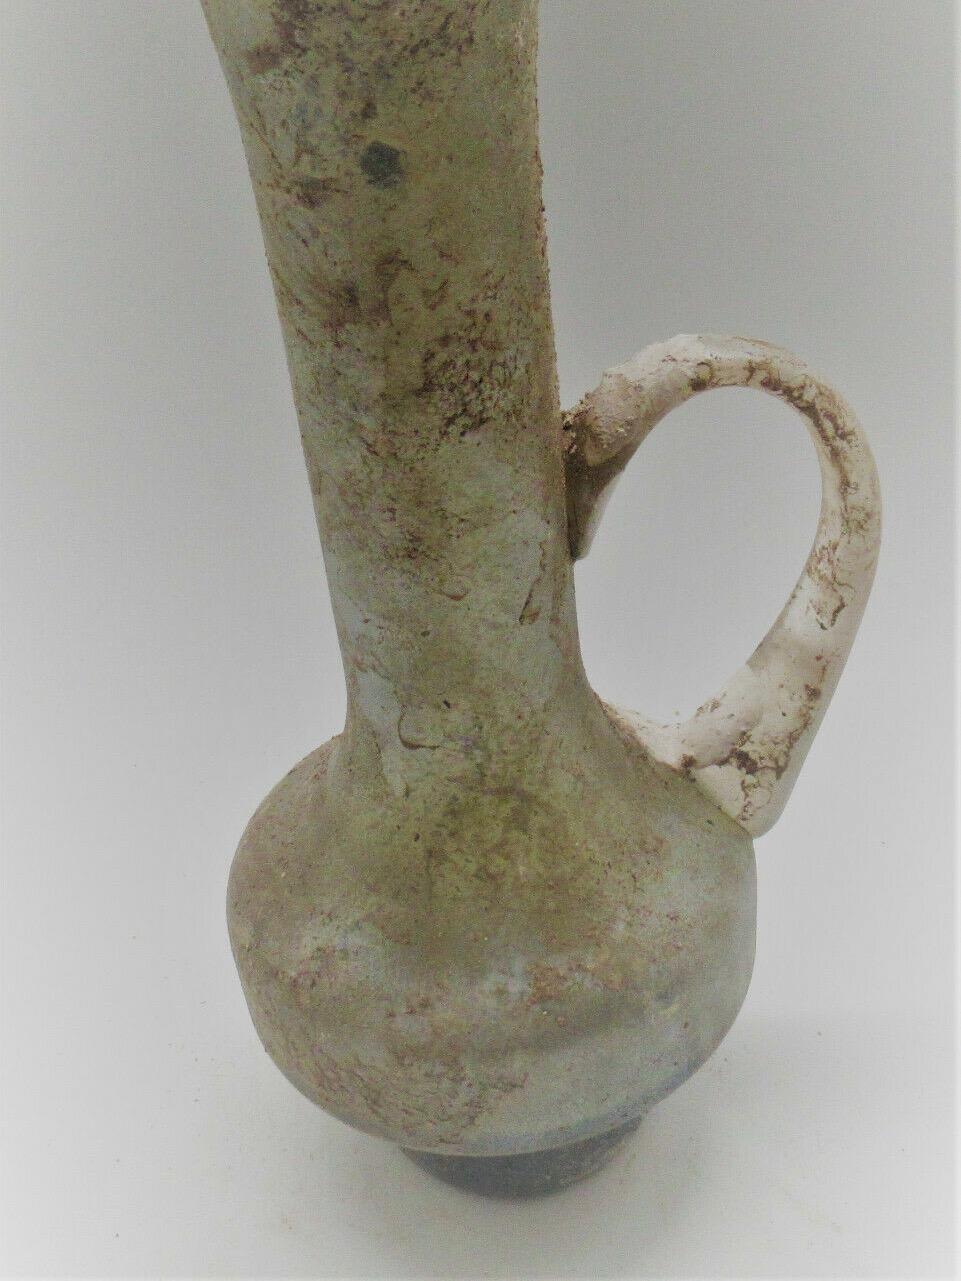 Museum qualityancient roman glass juglet with handle 200-300 AD
this is a lovely small vase, jar 26cm
total width with handle 13 cm
ancient roman glass
dark, silver, green, white fluorisent glass
¨aqua glasses¨.